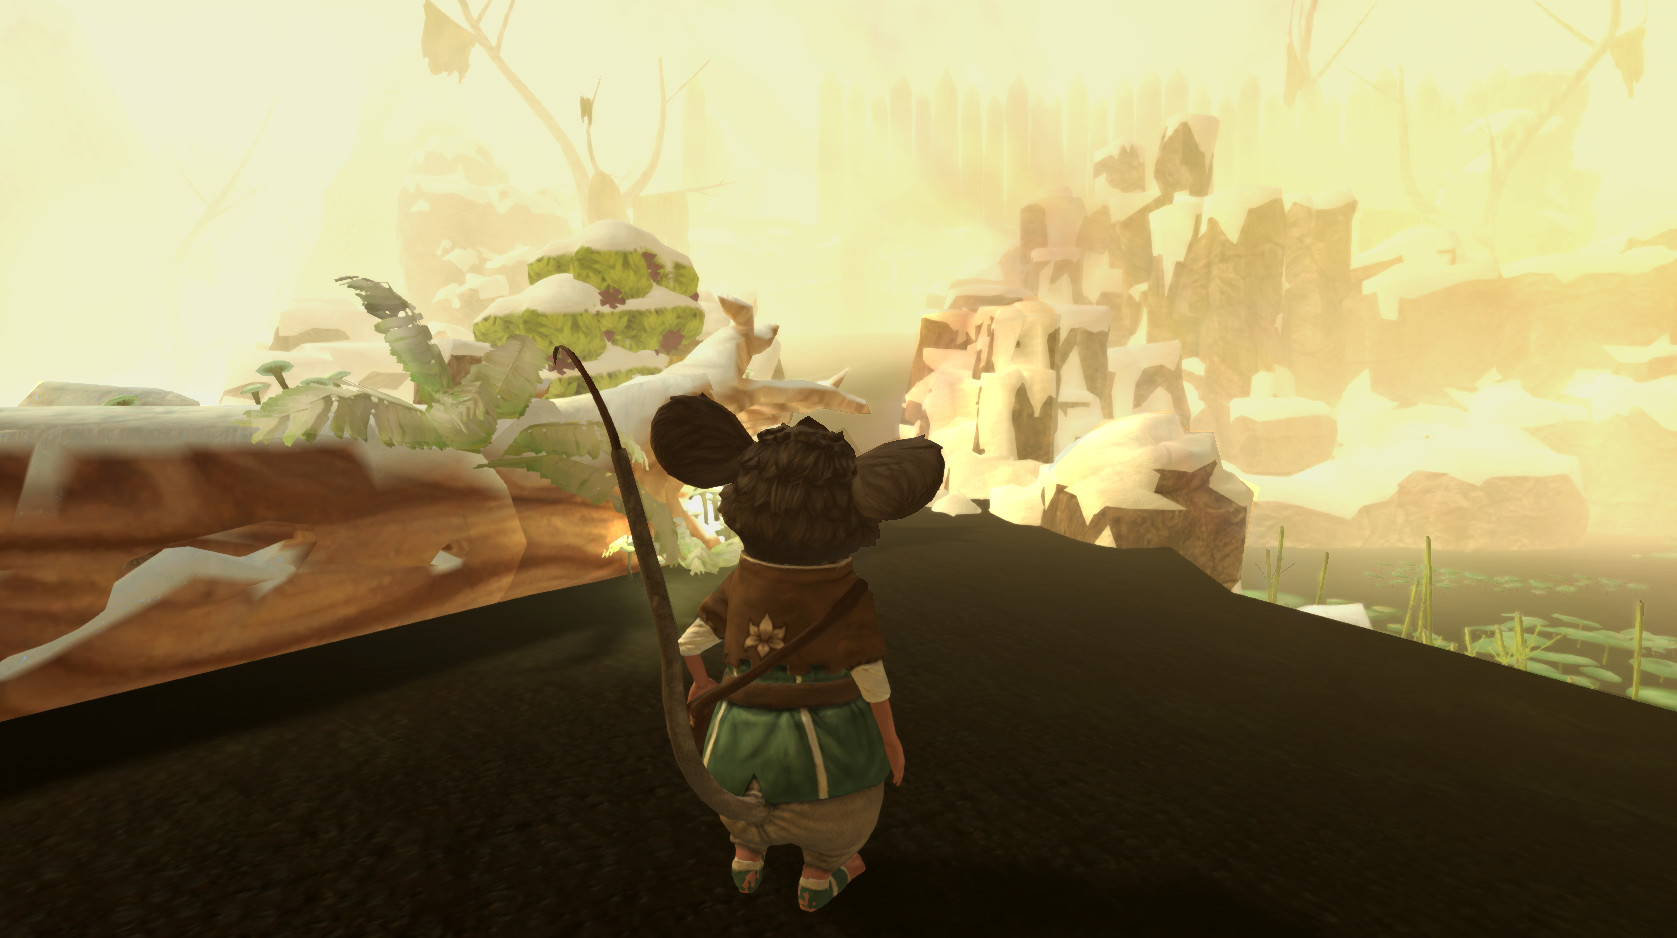 The Lost Legends of Redwall: The Scout Act III Demo Featured Screenshot #1